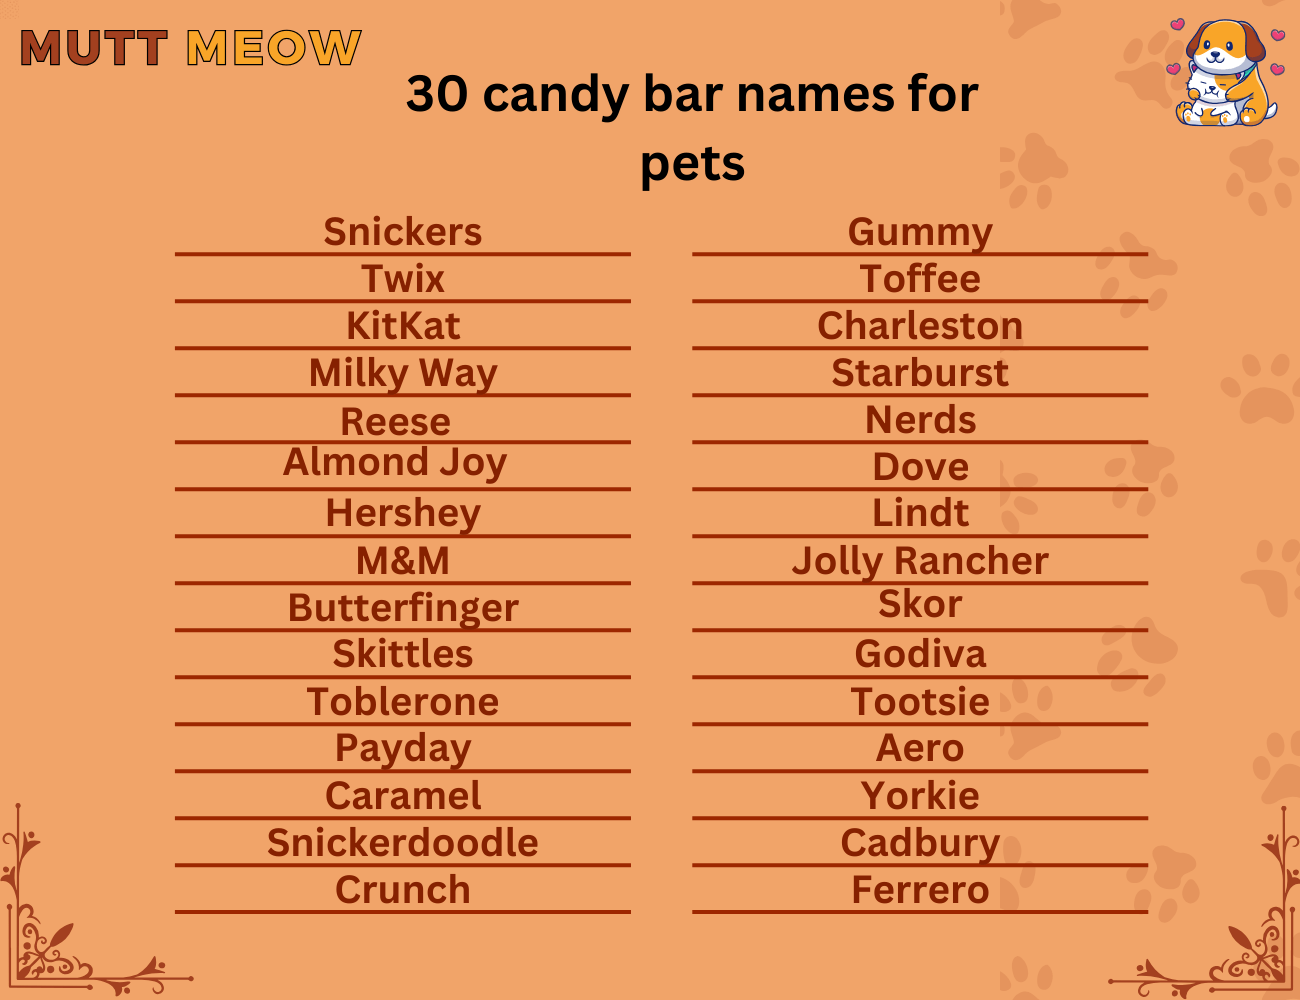 30 candy bar names for pets